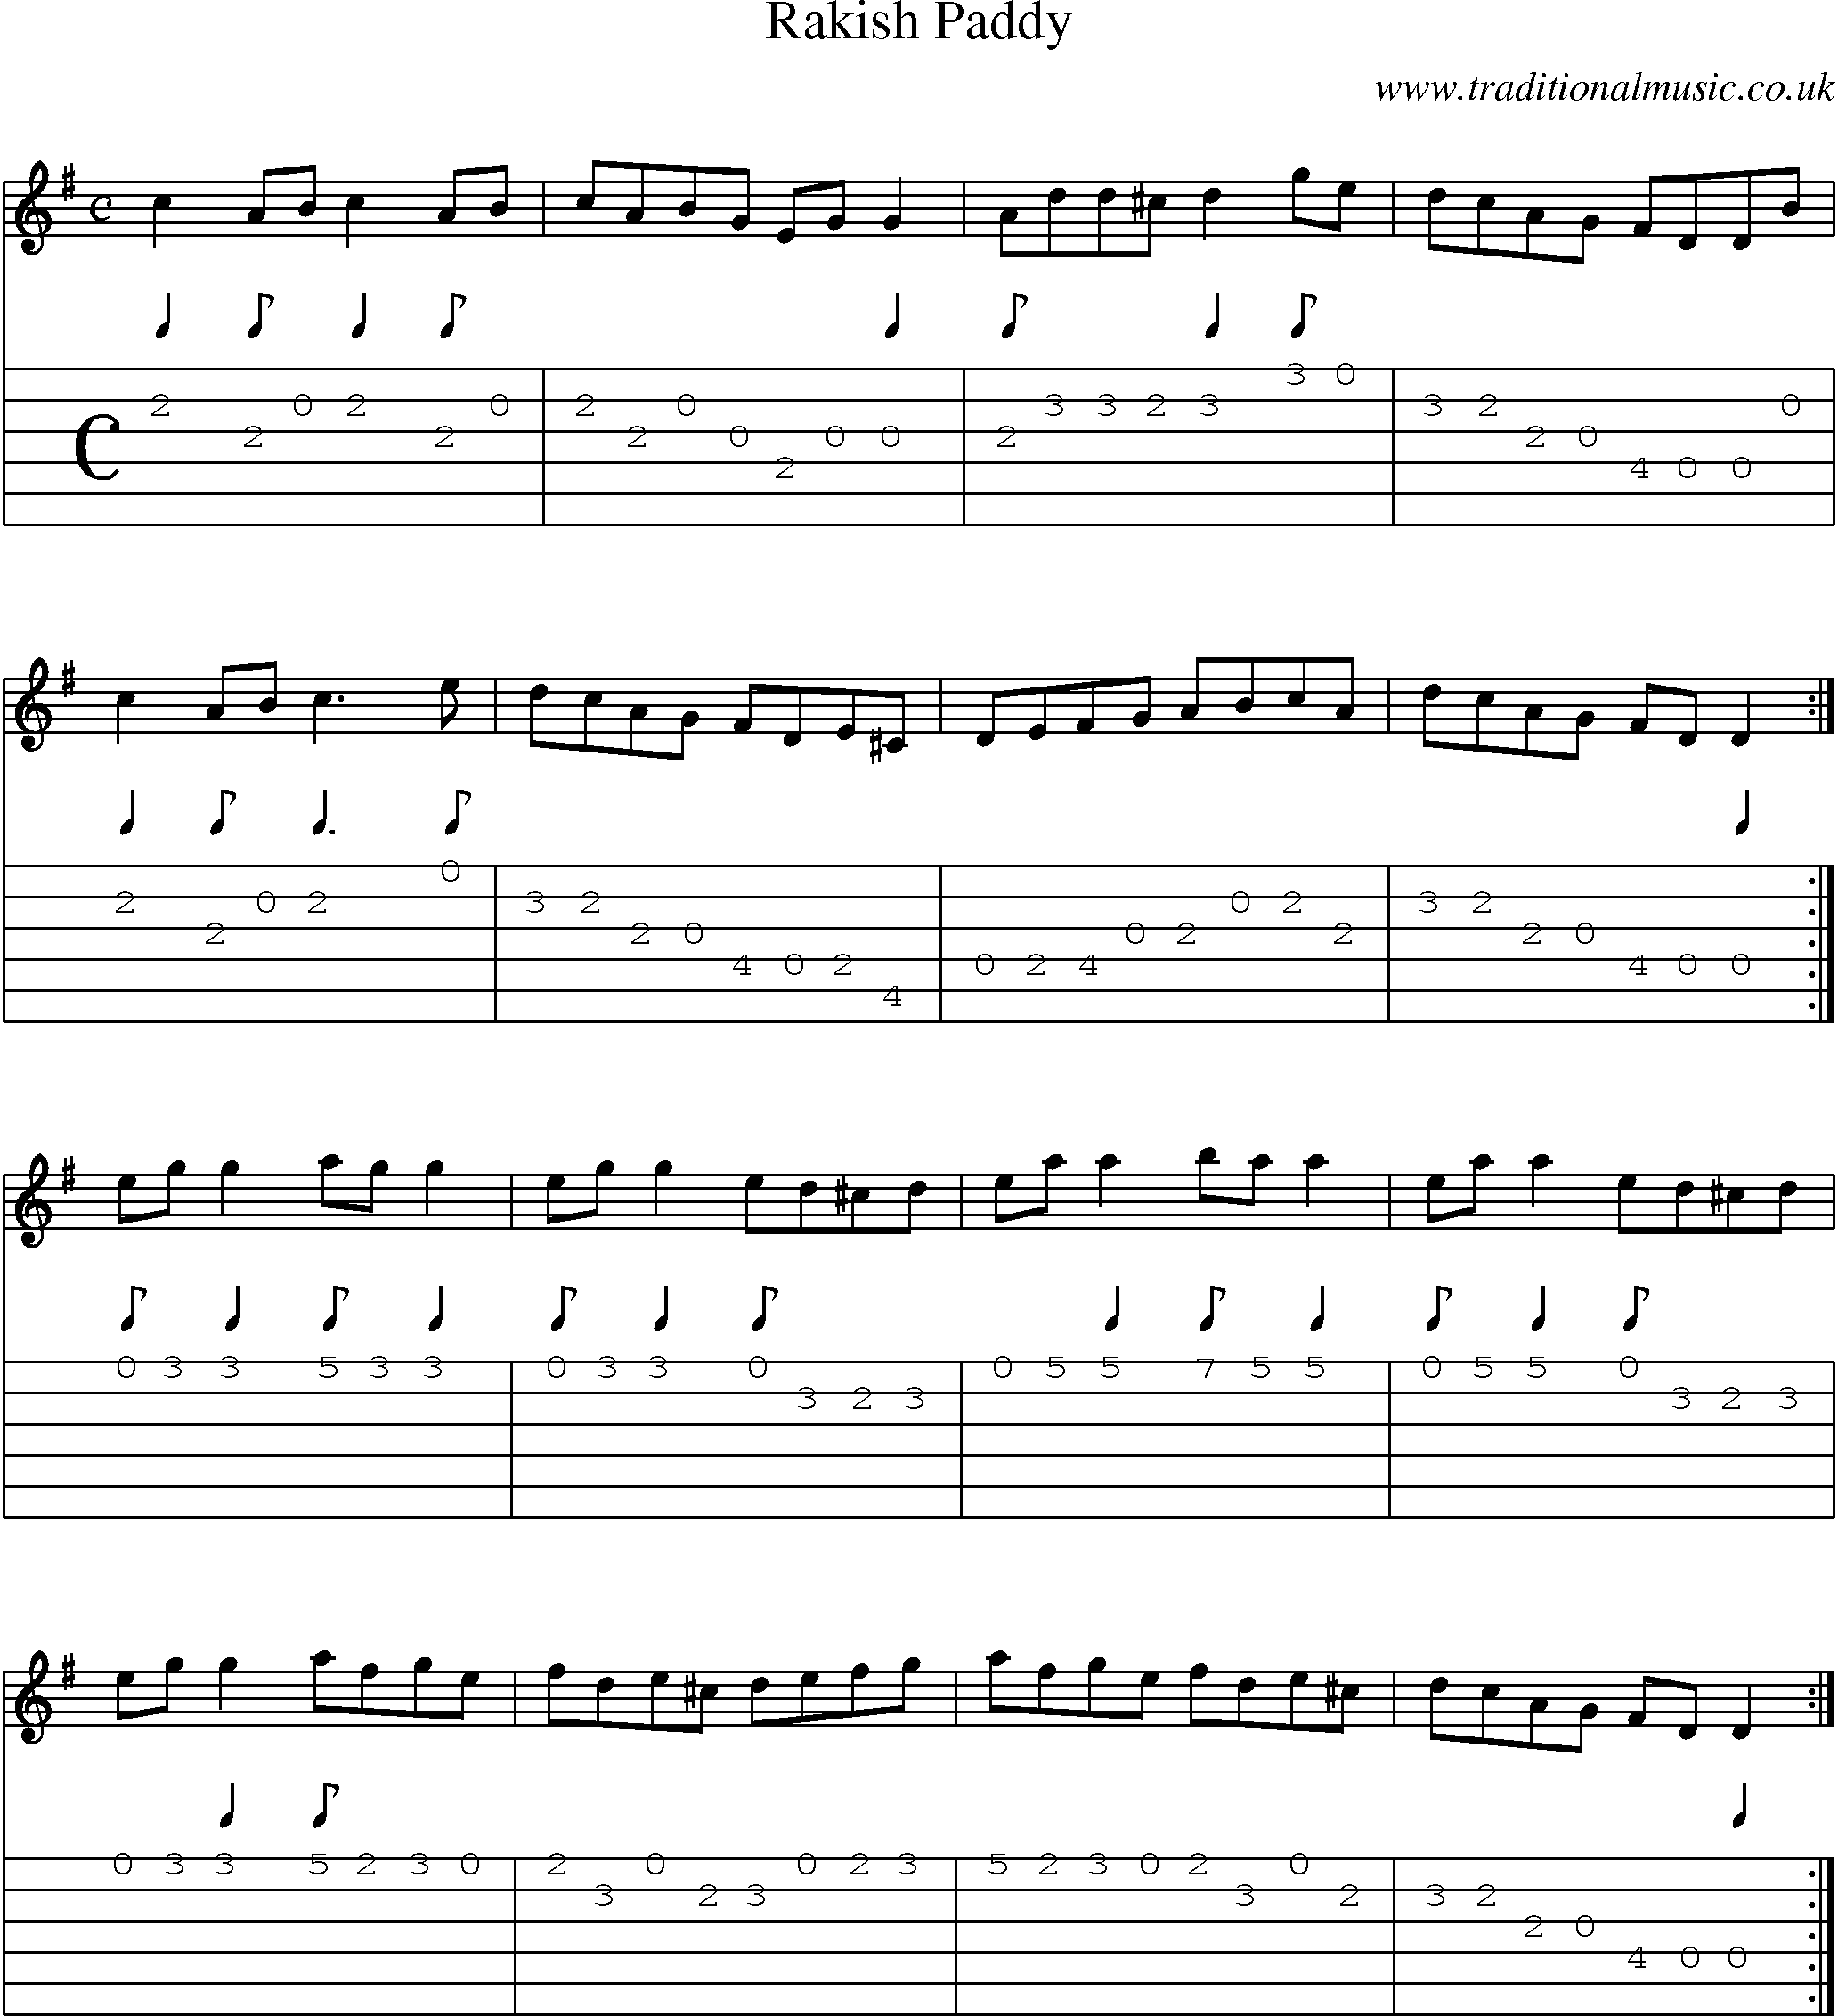 Music Score and Guitar Tabs for Rakisaddy